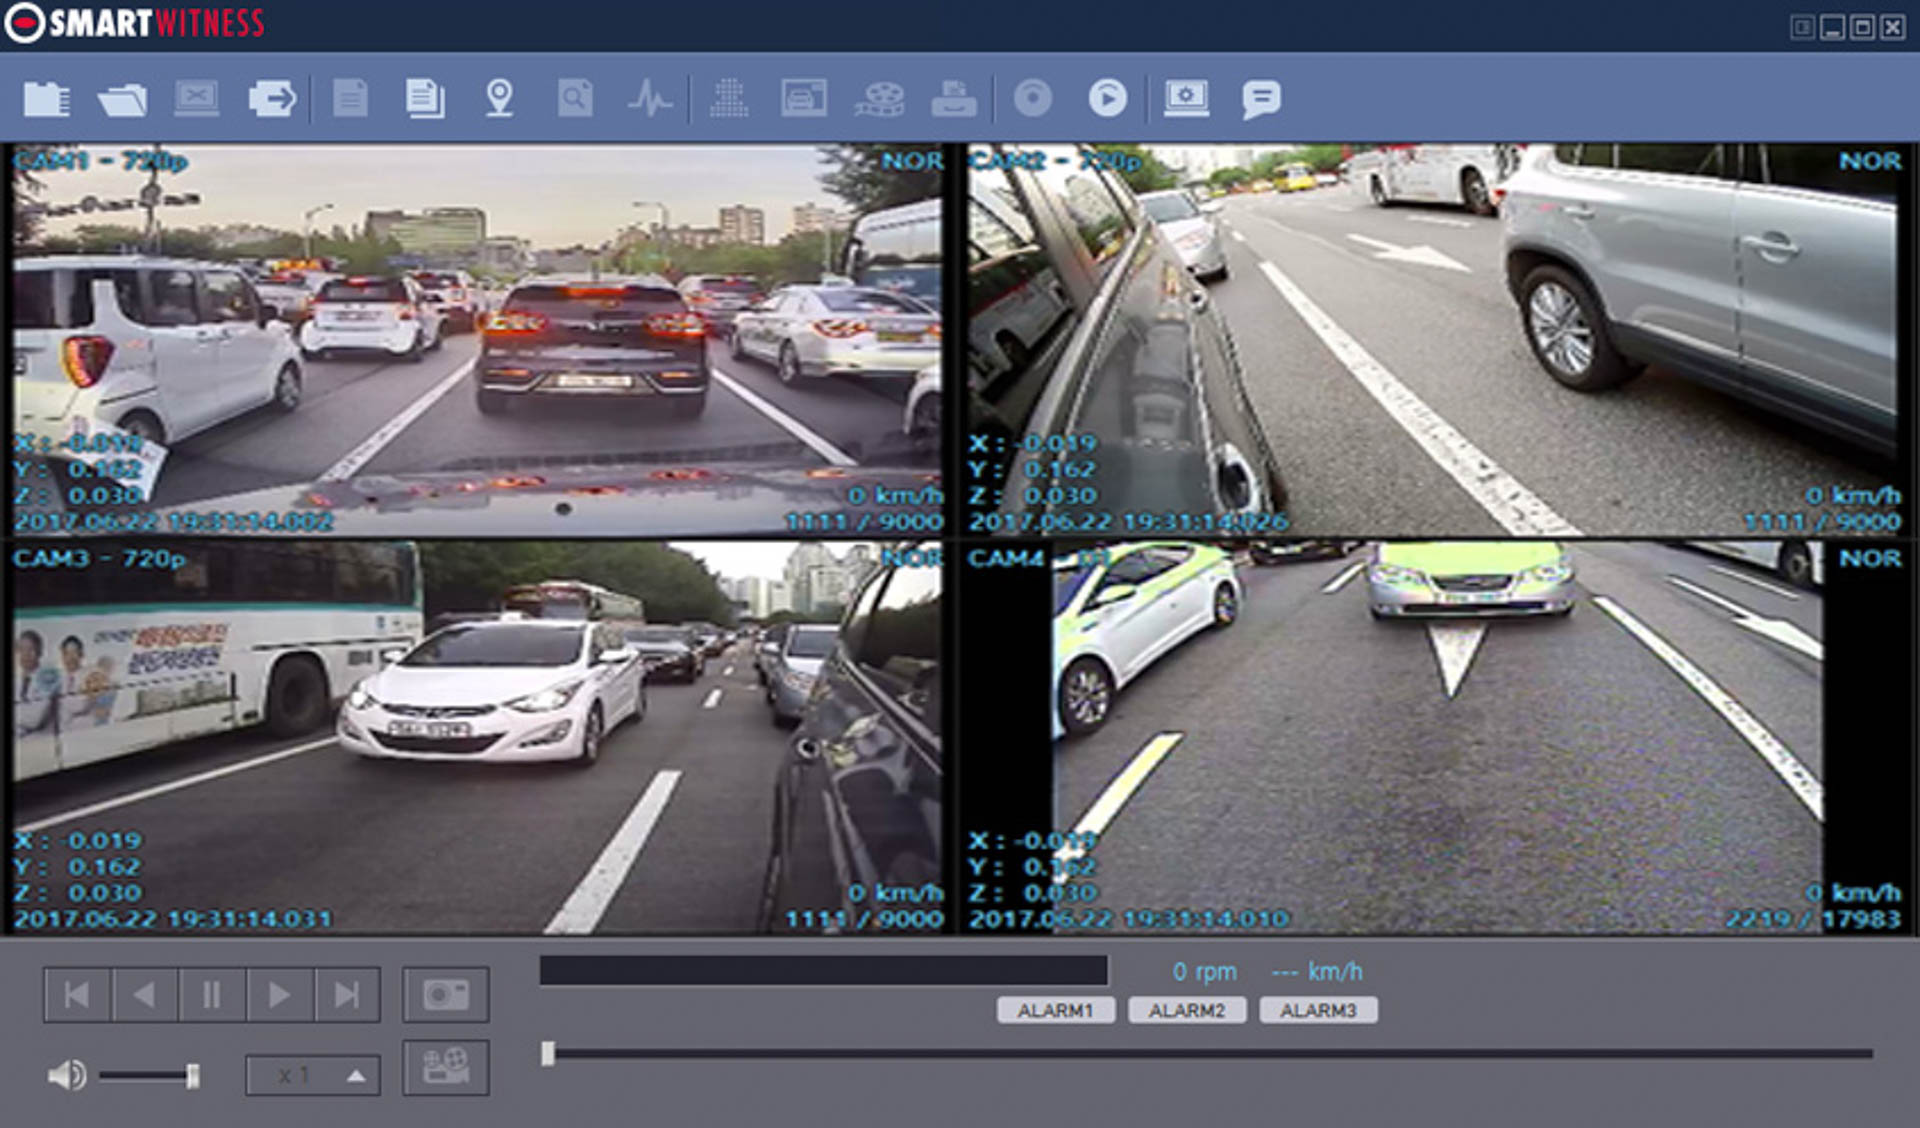 SmartWitness Remote Video Playback Software View | The Dashcam Store Blog